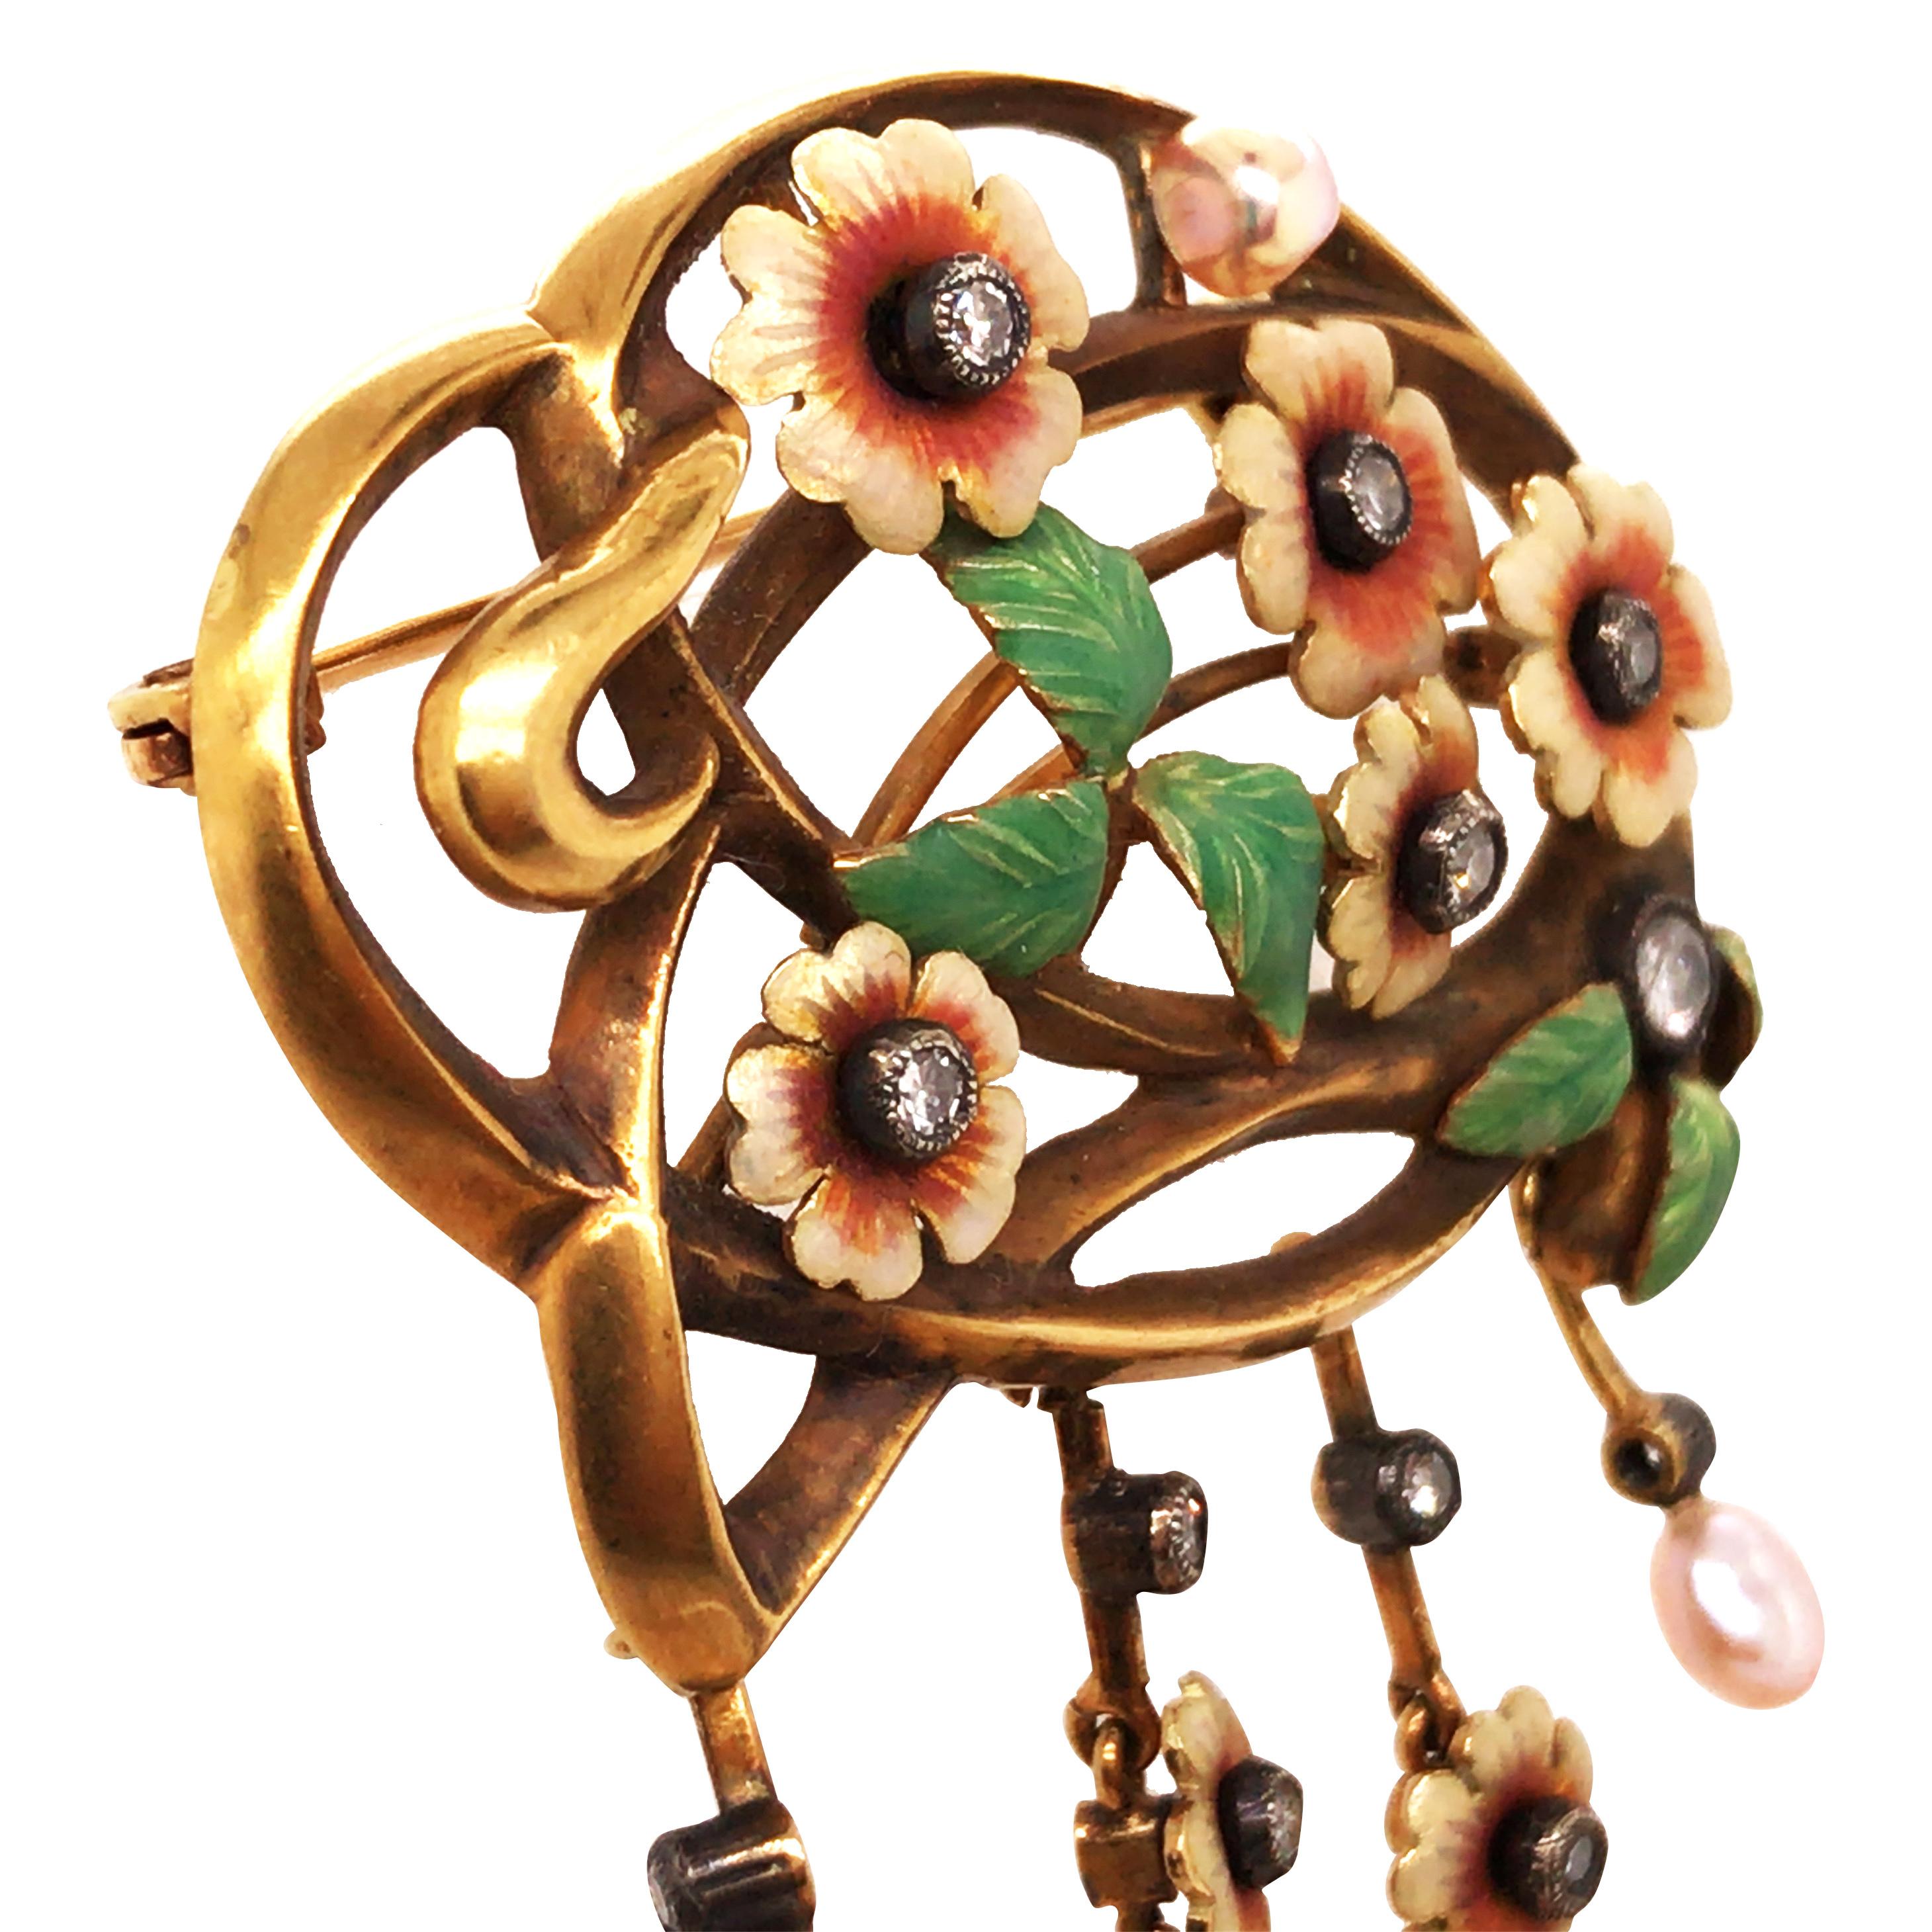 Art Nouveau brooch with diamonds total approx. 0.25ct, cultured pearls, 18K yellow gold, settings silver. Flowers and leaves with colored enamel, 4 flower tendrils, circa 1900, with case.

Weight: 18.2 grams
Measurement: 7 x 4 cm